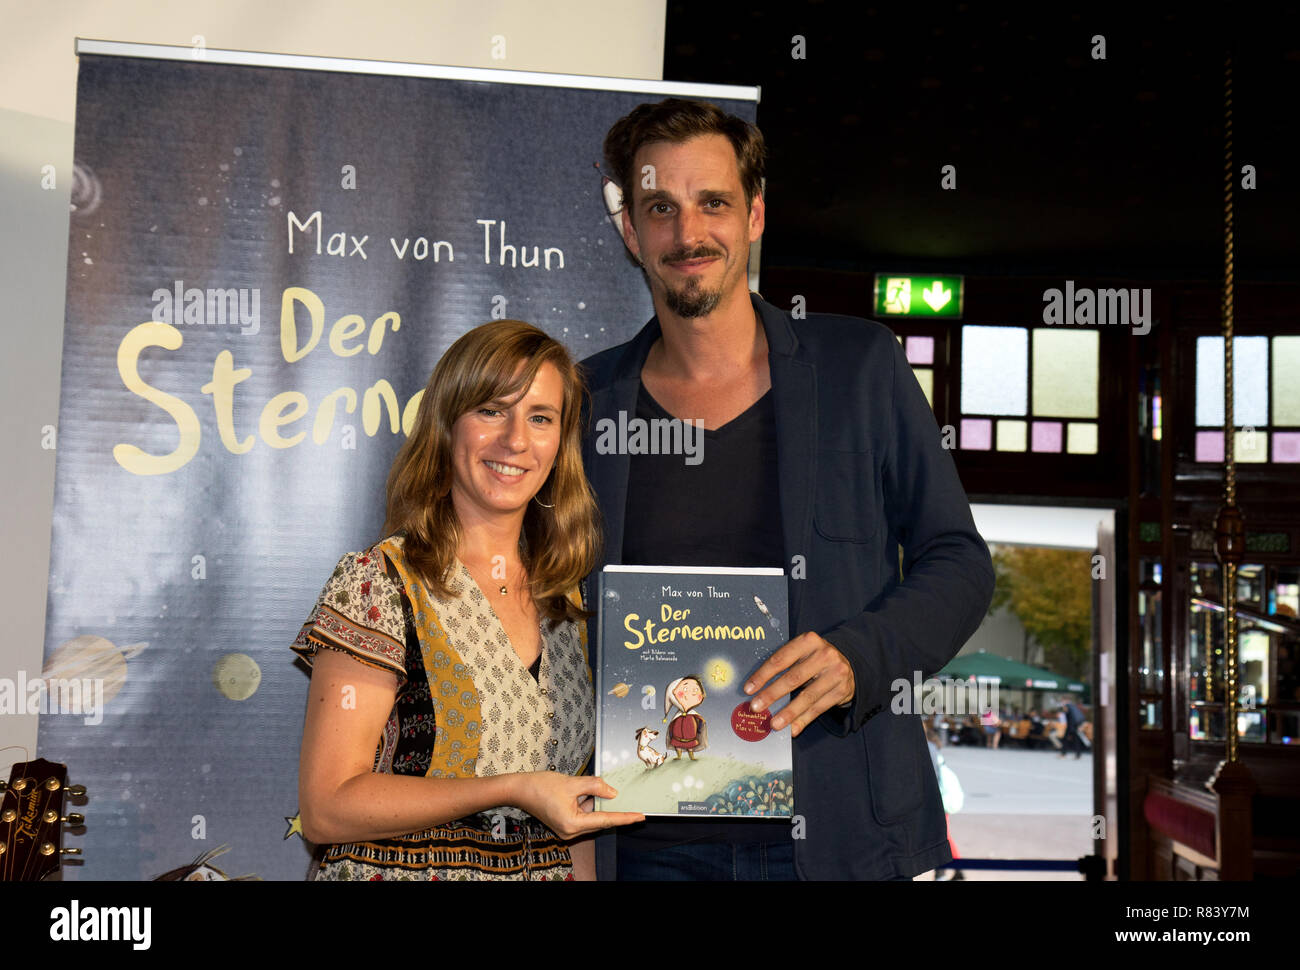 the writer max von thun presented his book 'Der Sternenmann' at the book fair 2018 in frankfurt am main germany during a reading with the illustrator Stock Photo